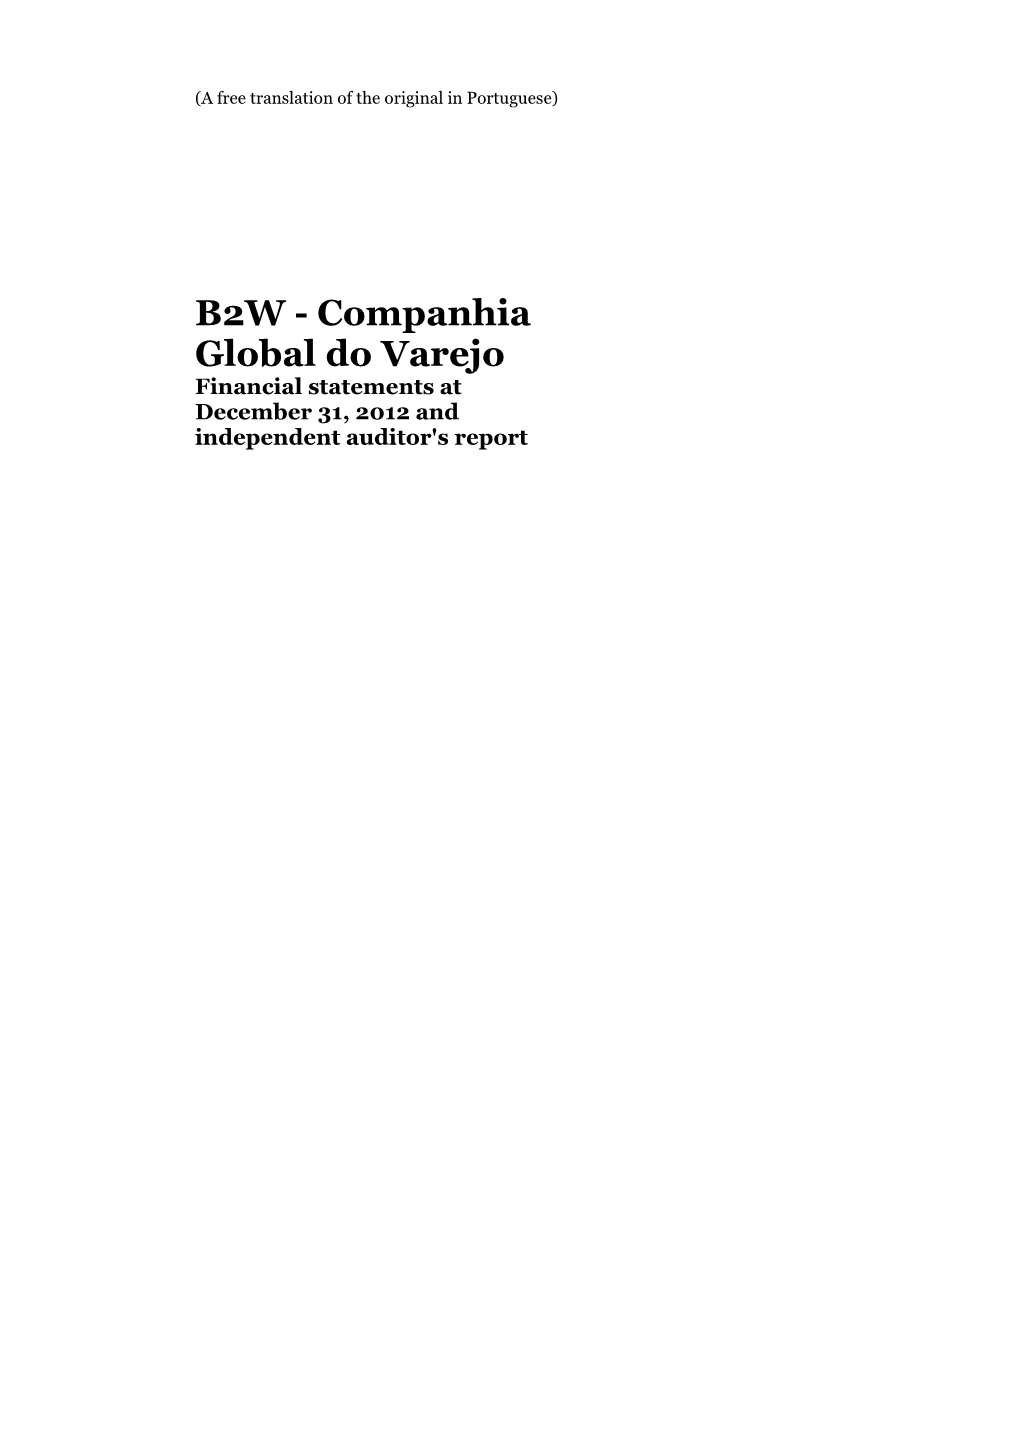 B2W - Companhia Global Do Varejo Financial Statements at December 31, 2012 and Independent Auditor's Report (A Free Translation of the Original in Portuguese)